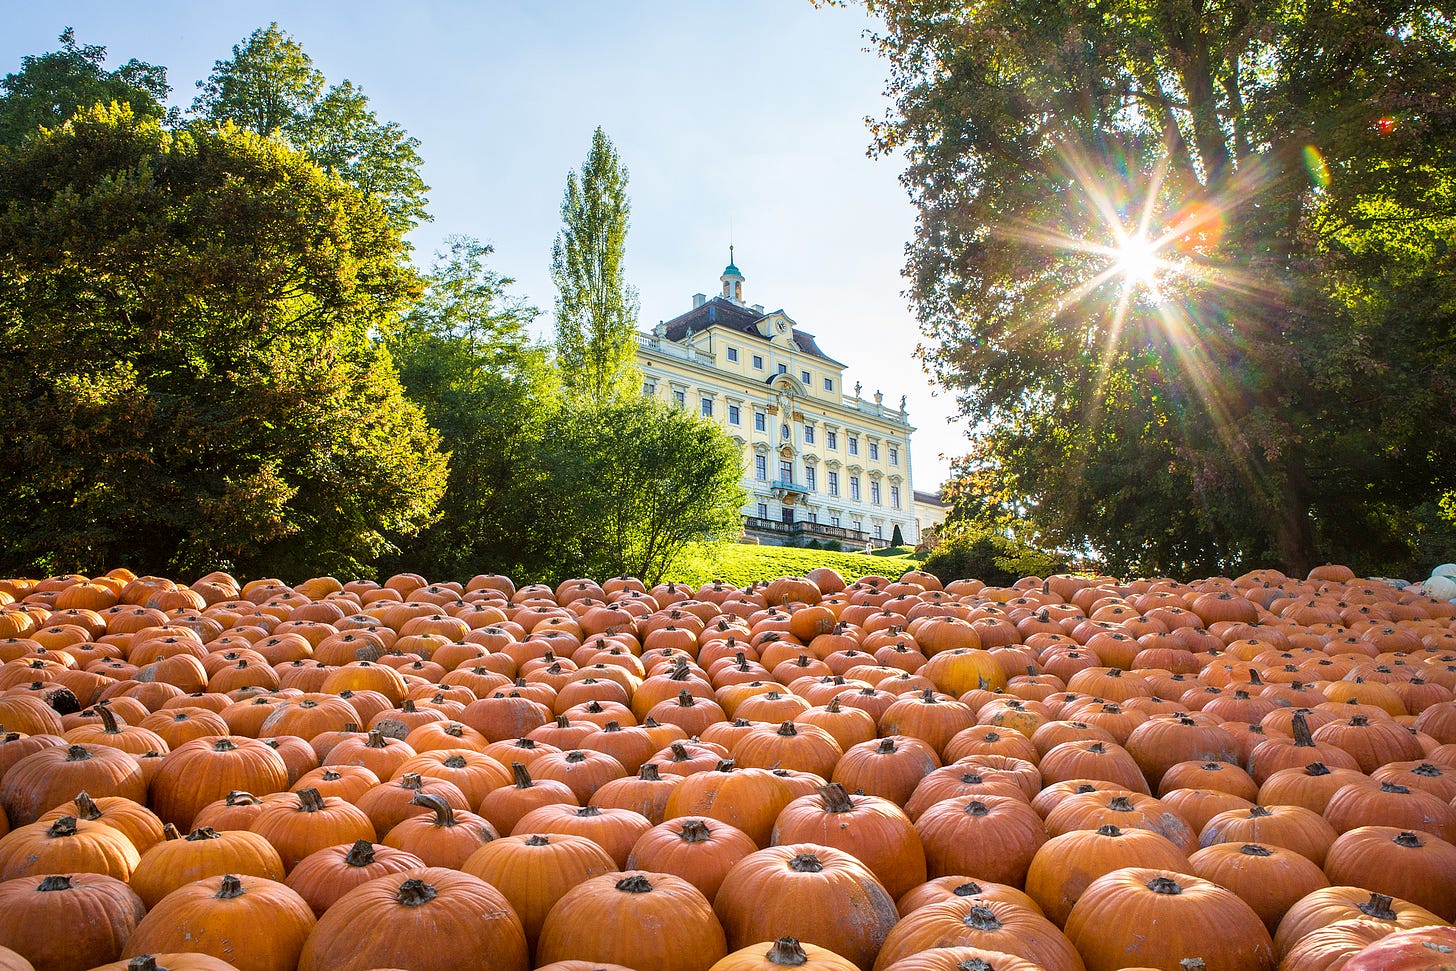 Rows and rows of hundreds of orange pumpkins in front of some leafy trees and Ludwigsburg Palace behind. The sky is blue and the sun shining through the trees.